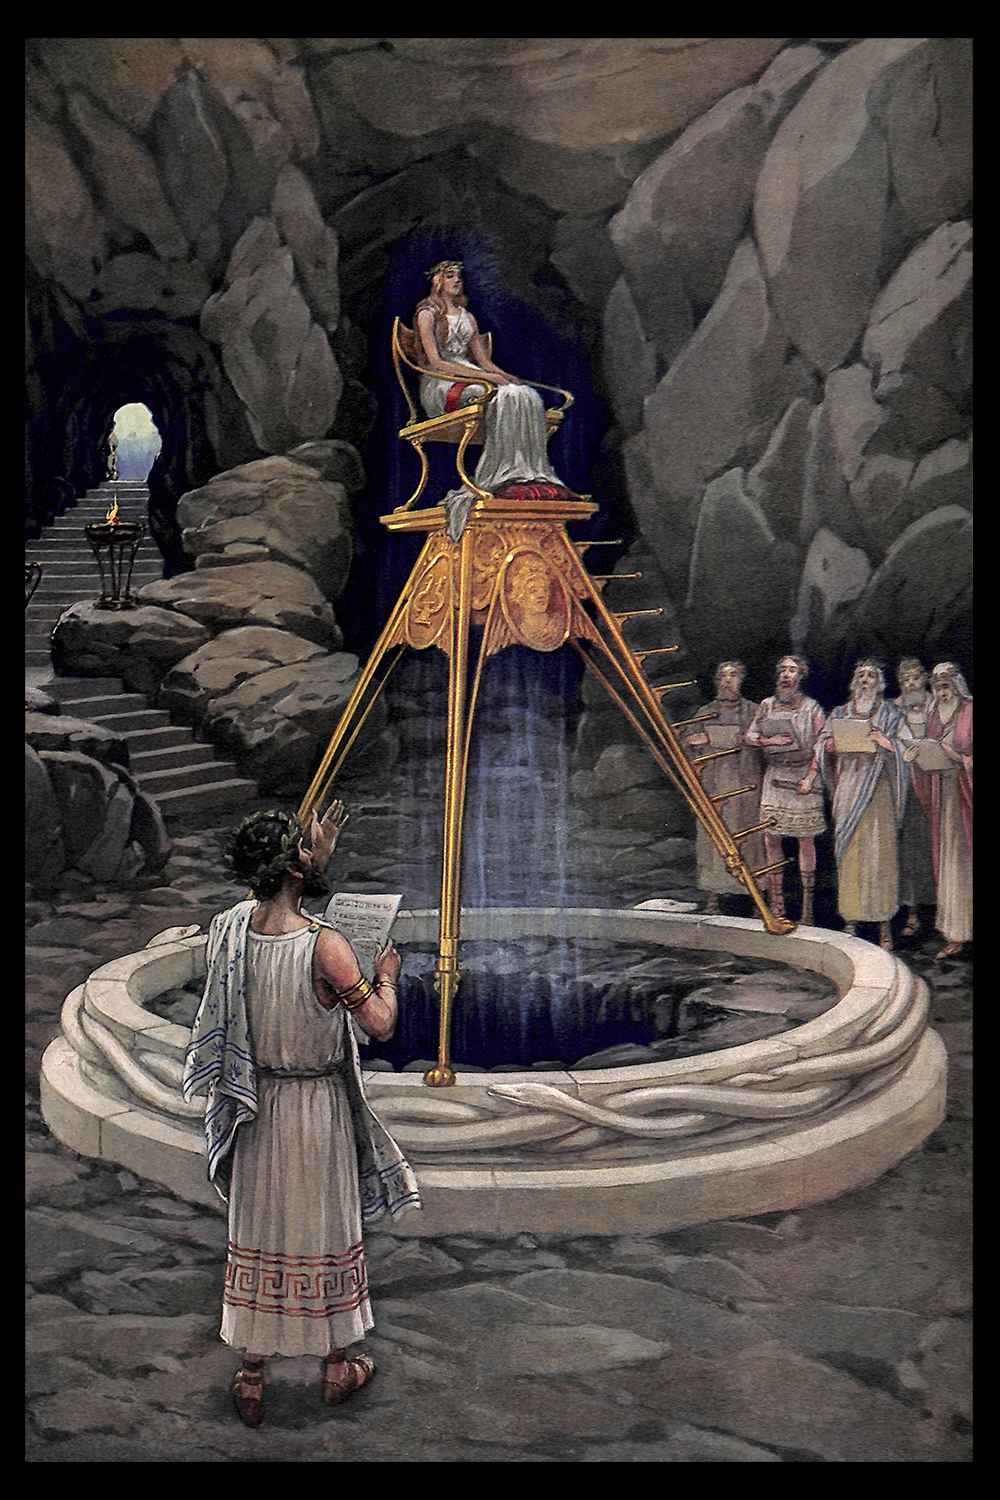 PLATE 11: The Oracle of Delphi